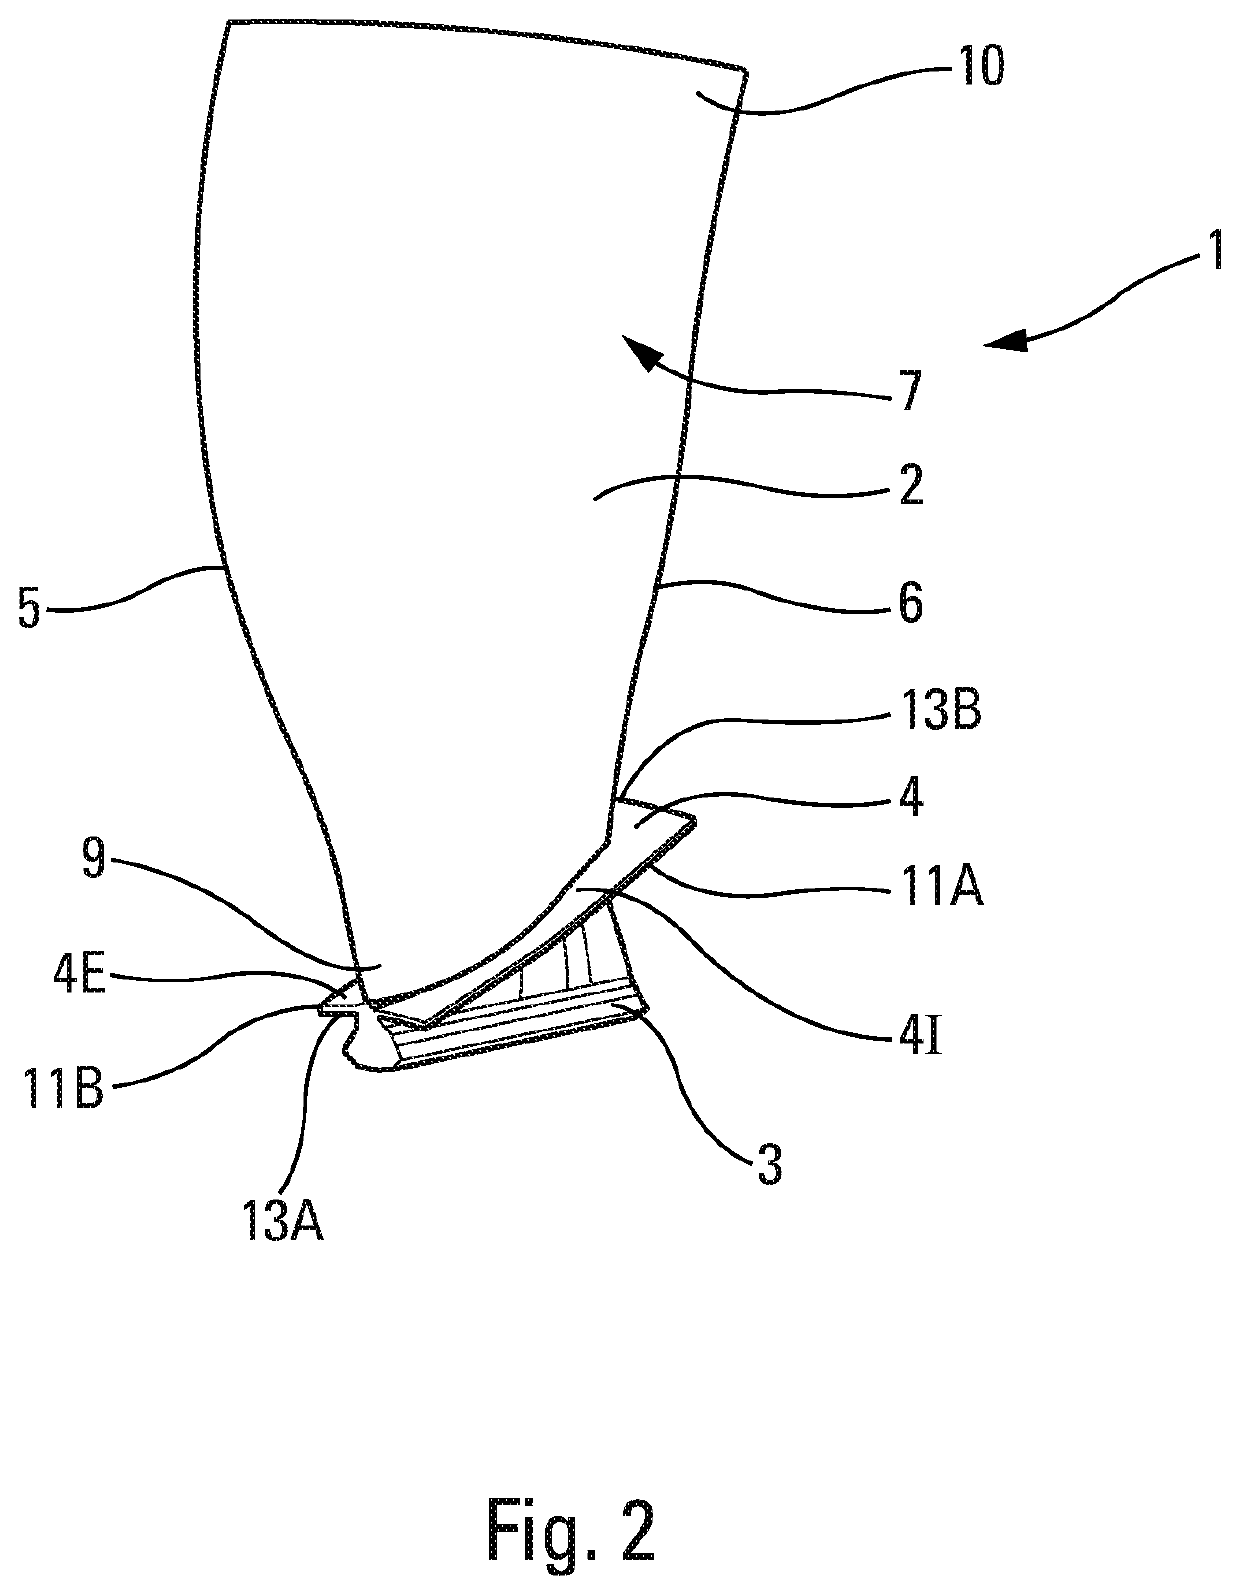 Assembly of turbine engine parts comprising a fan blade having an integrated platform, and corresponding turbine engine